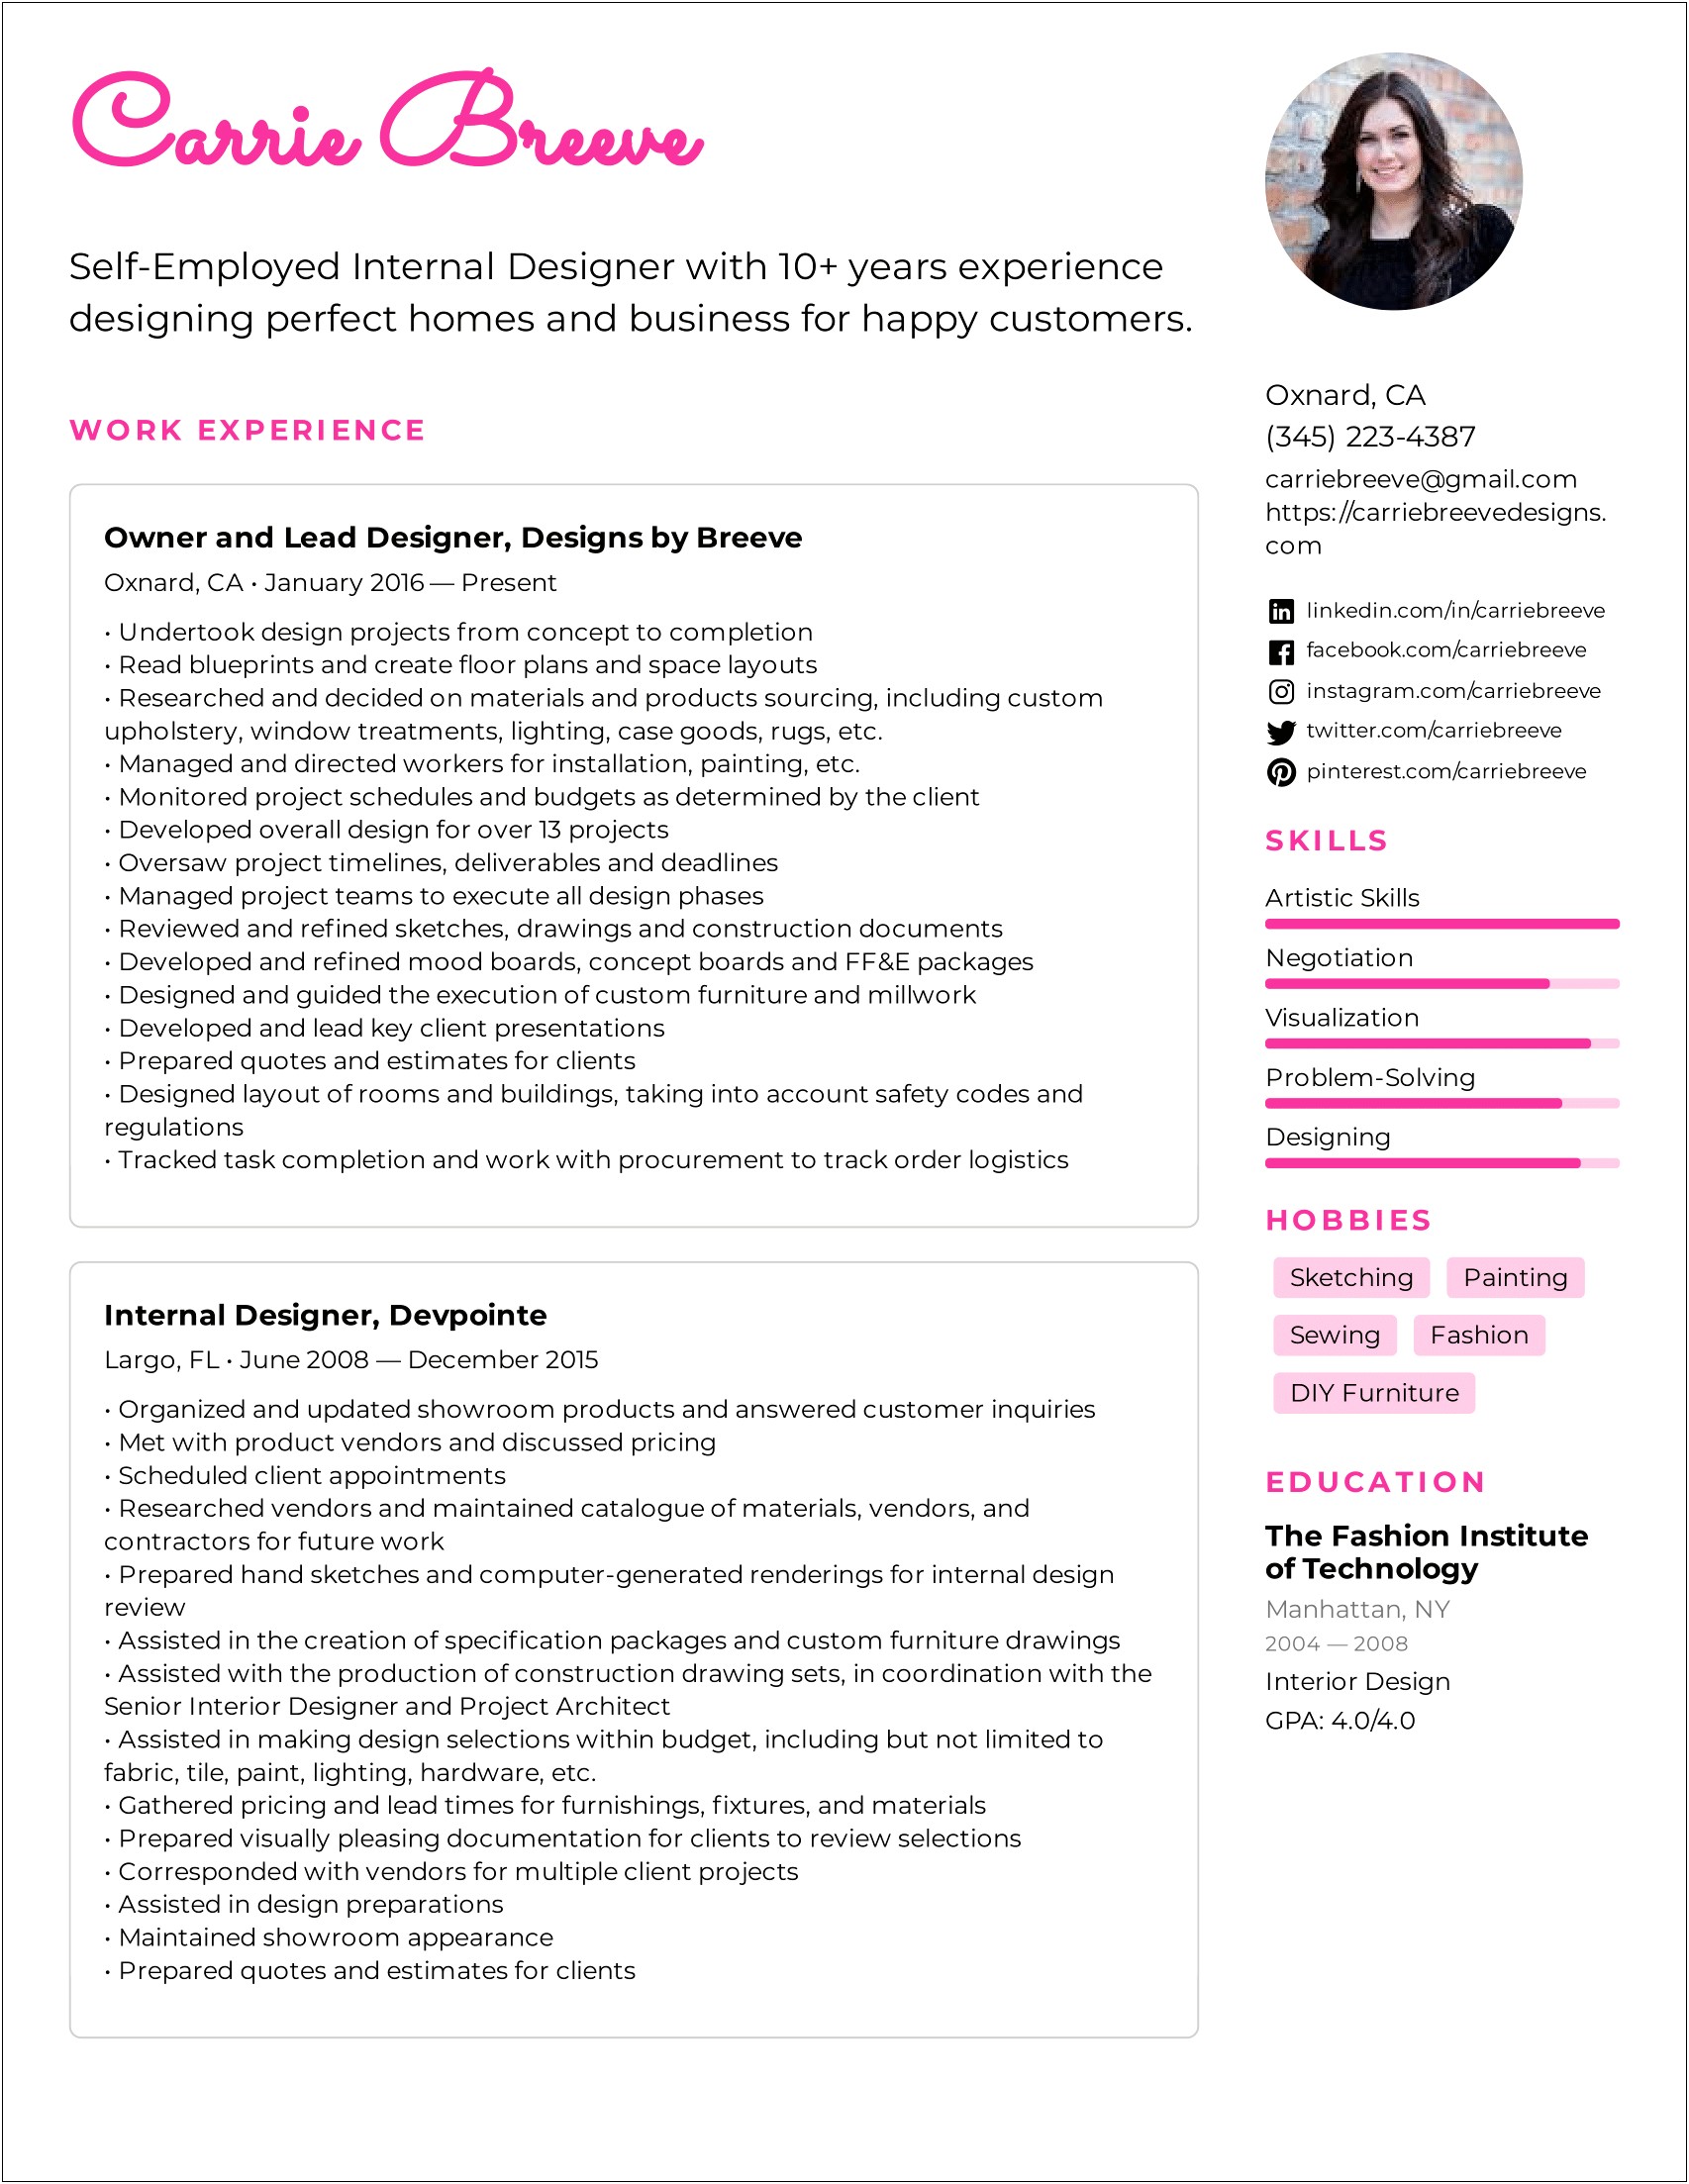 Resume Examples For Design Jobs